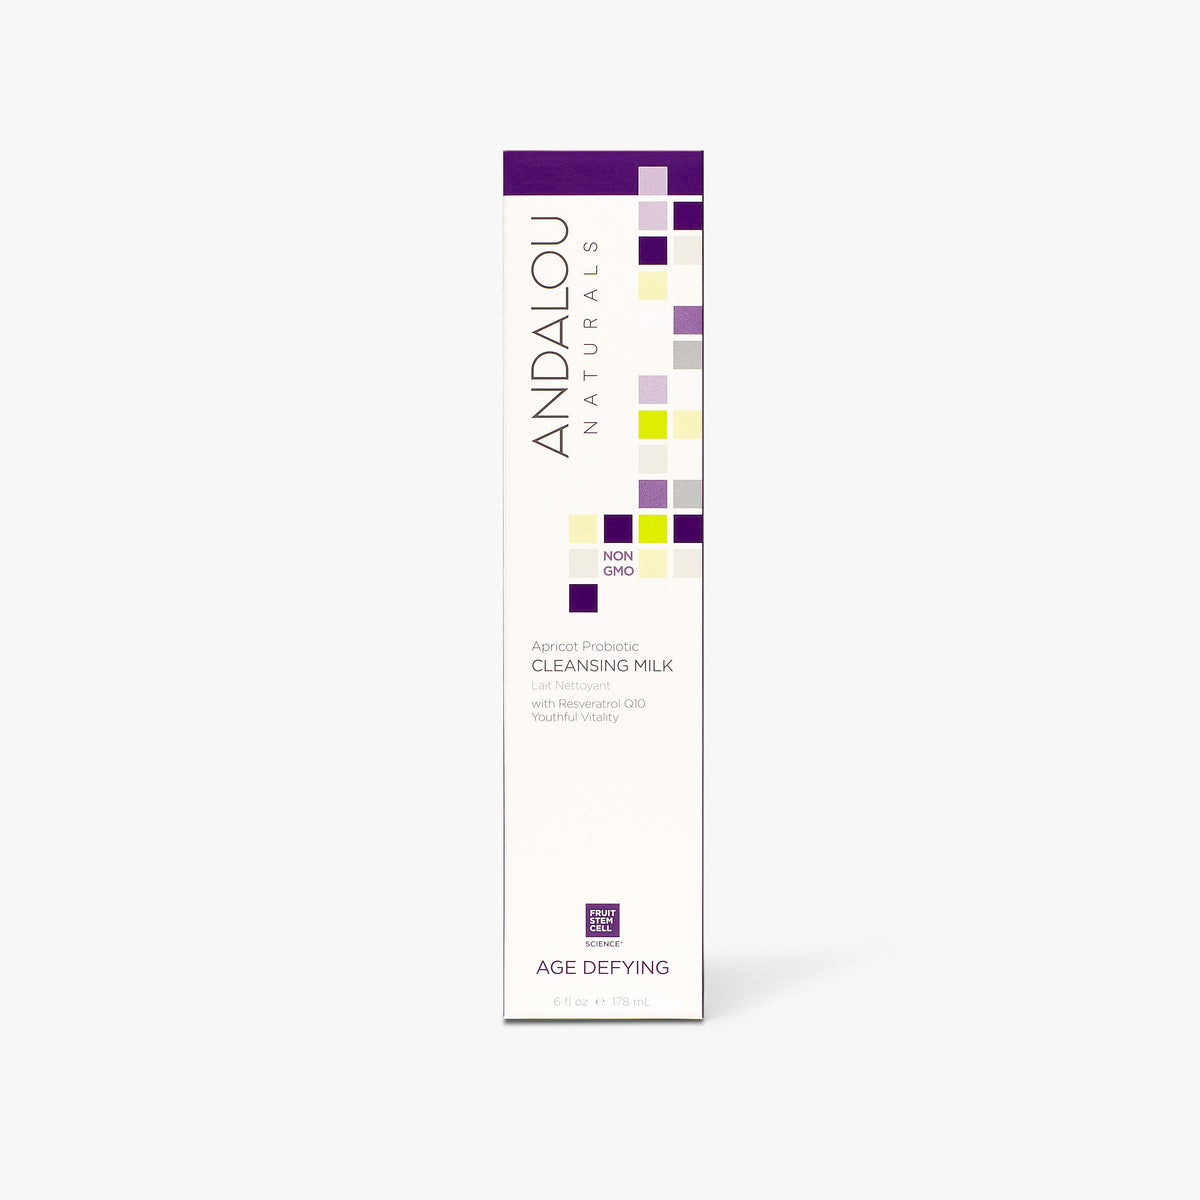 Age Defying Apricot Probiotic Cleansing Milk - Andalou Naturals US